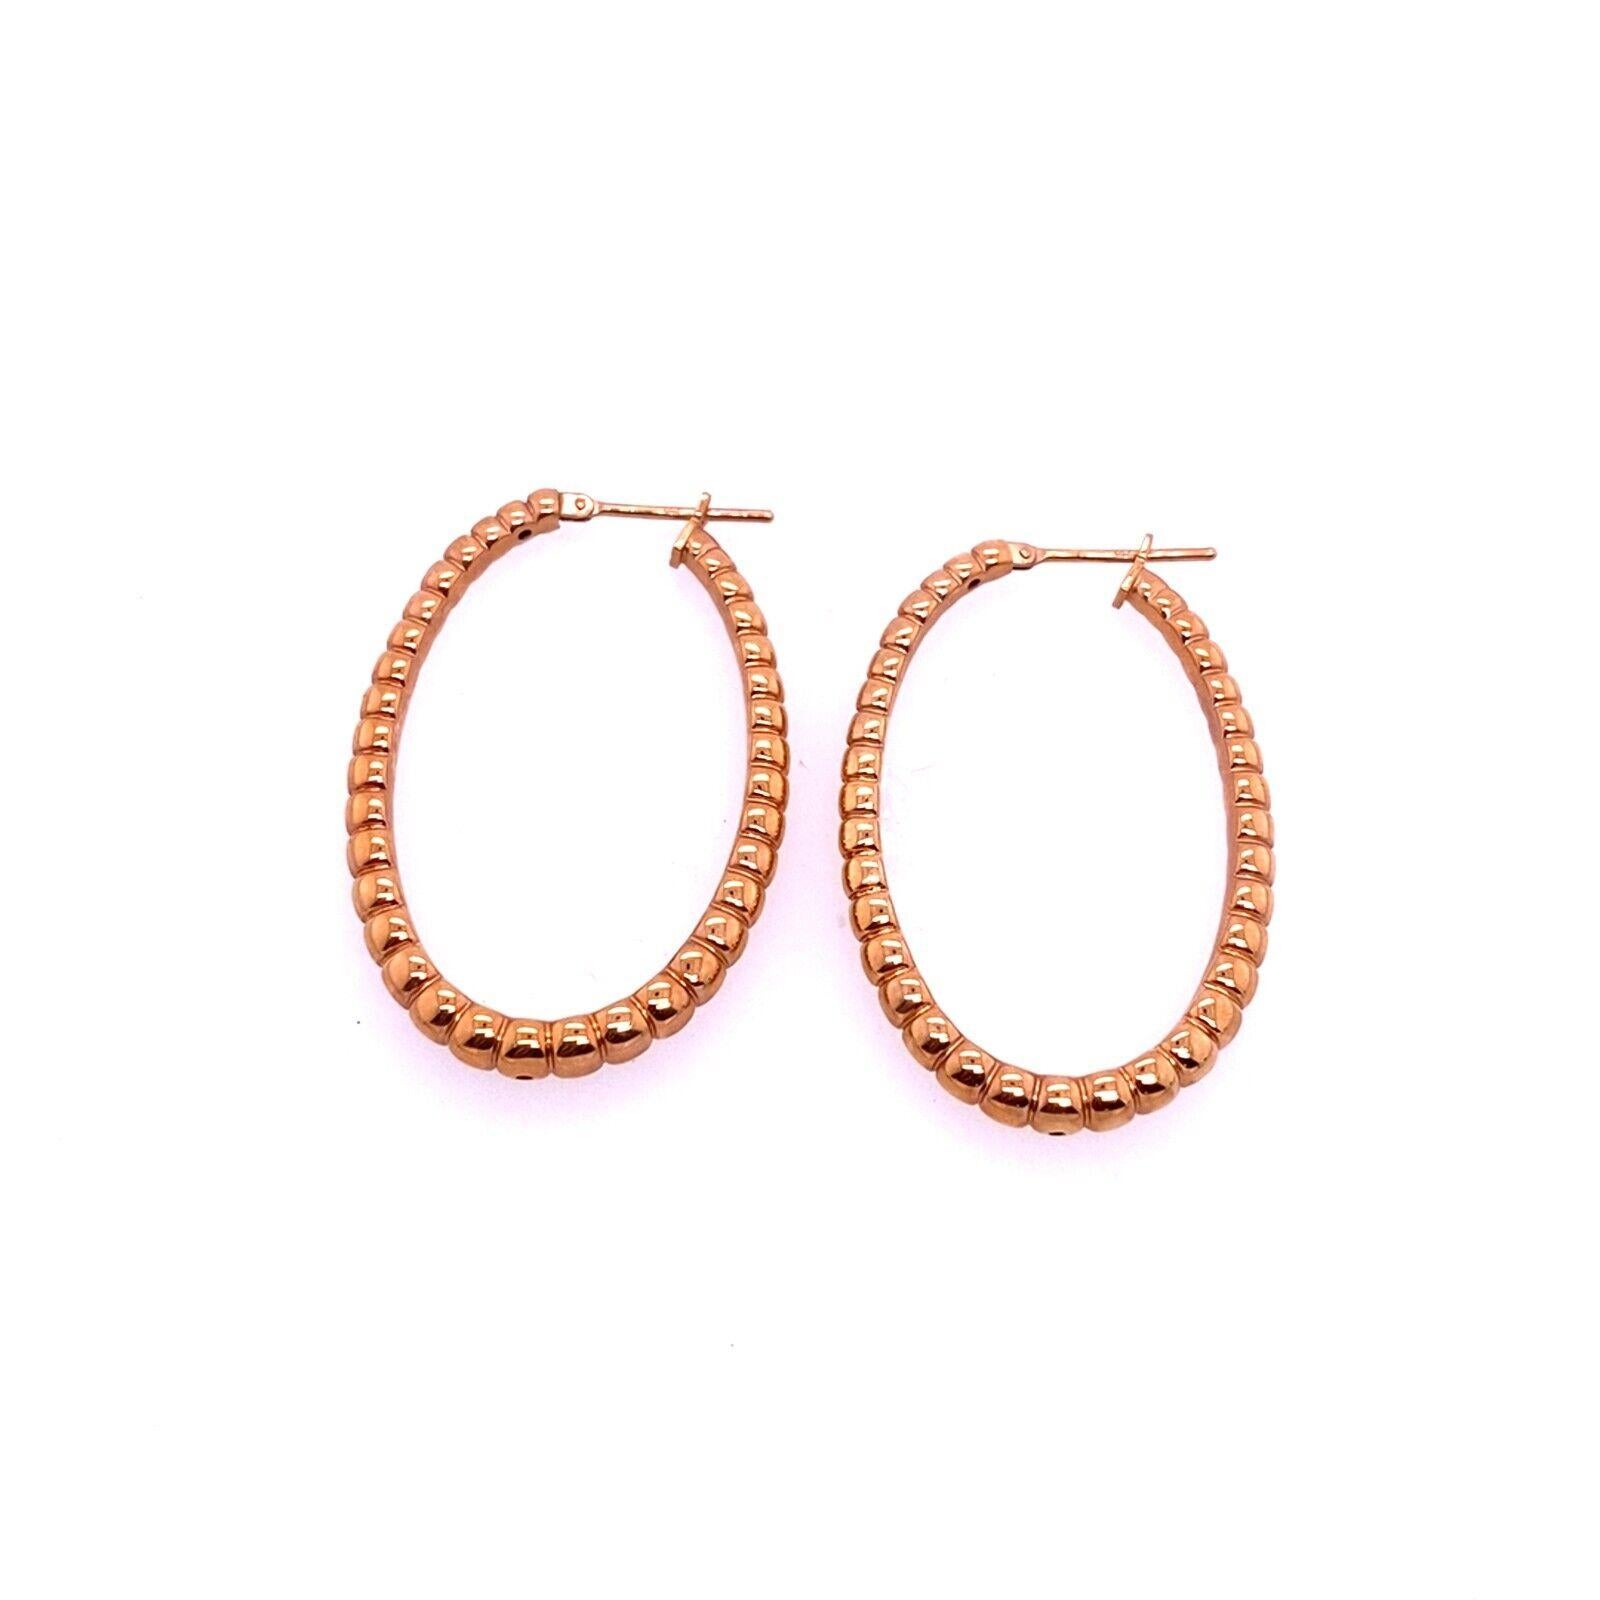 U Shape Fluted Hoop Earrings with Click Fitting in 18ct Rose Gold

This is an exclusive pair of 18ct Rose Gold U shape fluted hoops. The earrings are secured in a click fitting that ensures the earrings stay in place. 

Additional